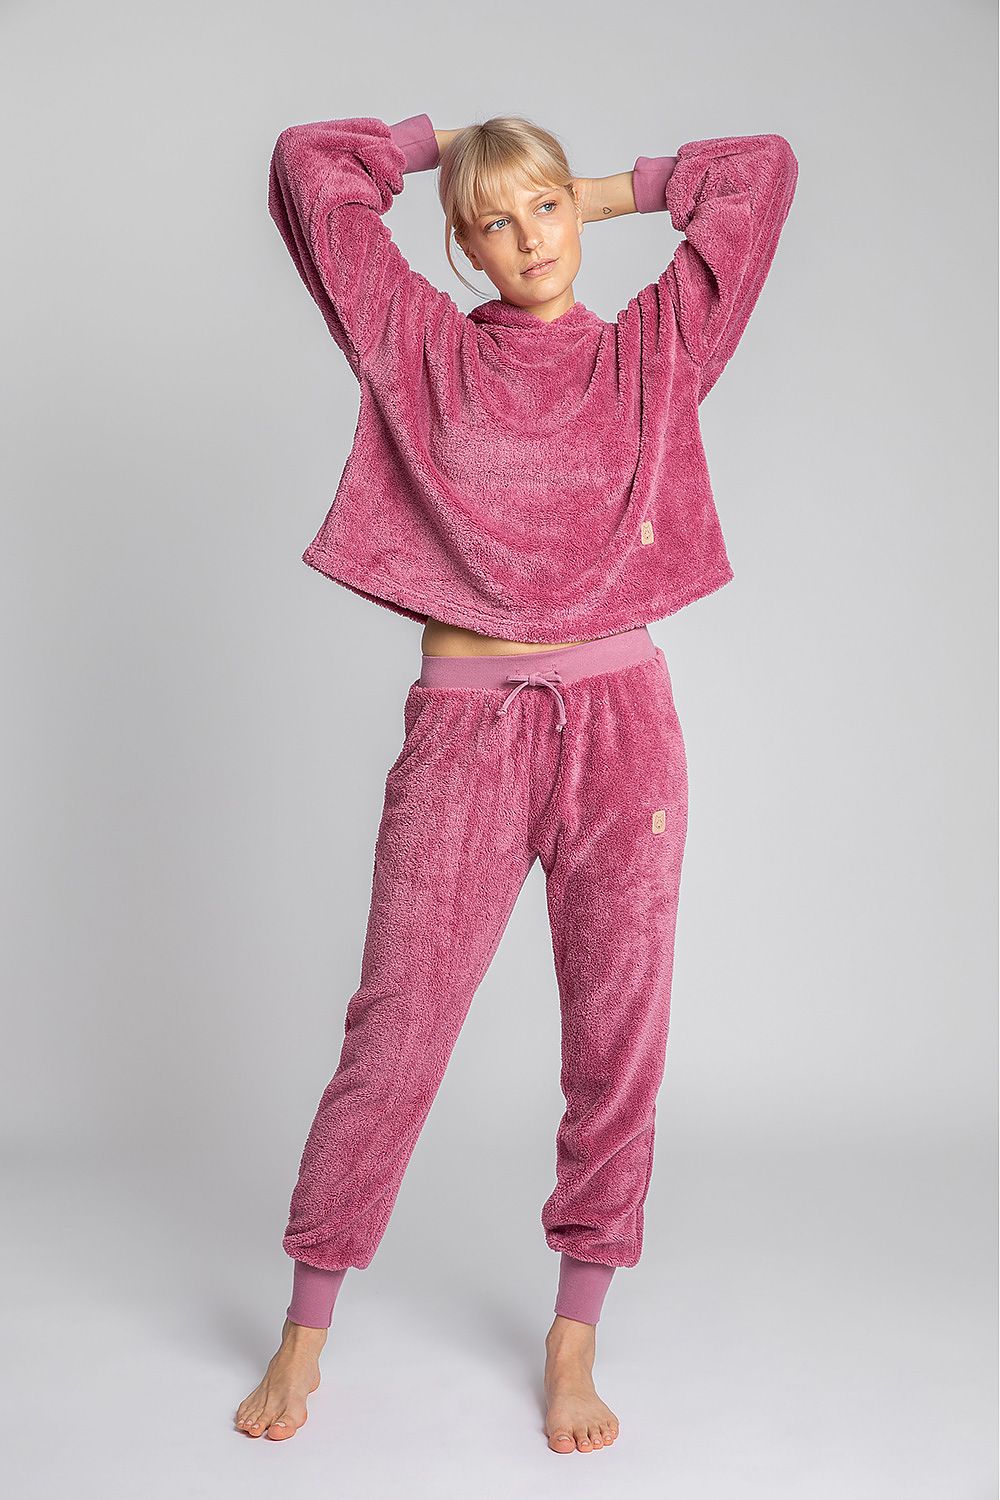 These heavenly lightweight joggers in plush knit will make lazy moments at home more enjoyable and are perfect for a walk when it's chilly outside. Colour: pink.